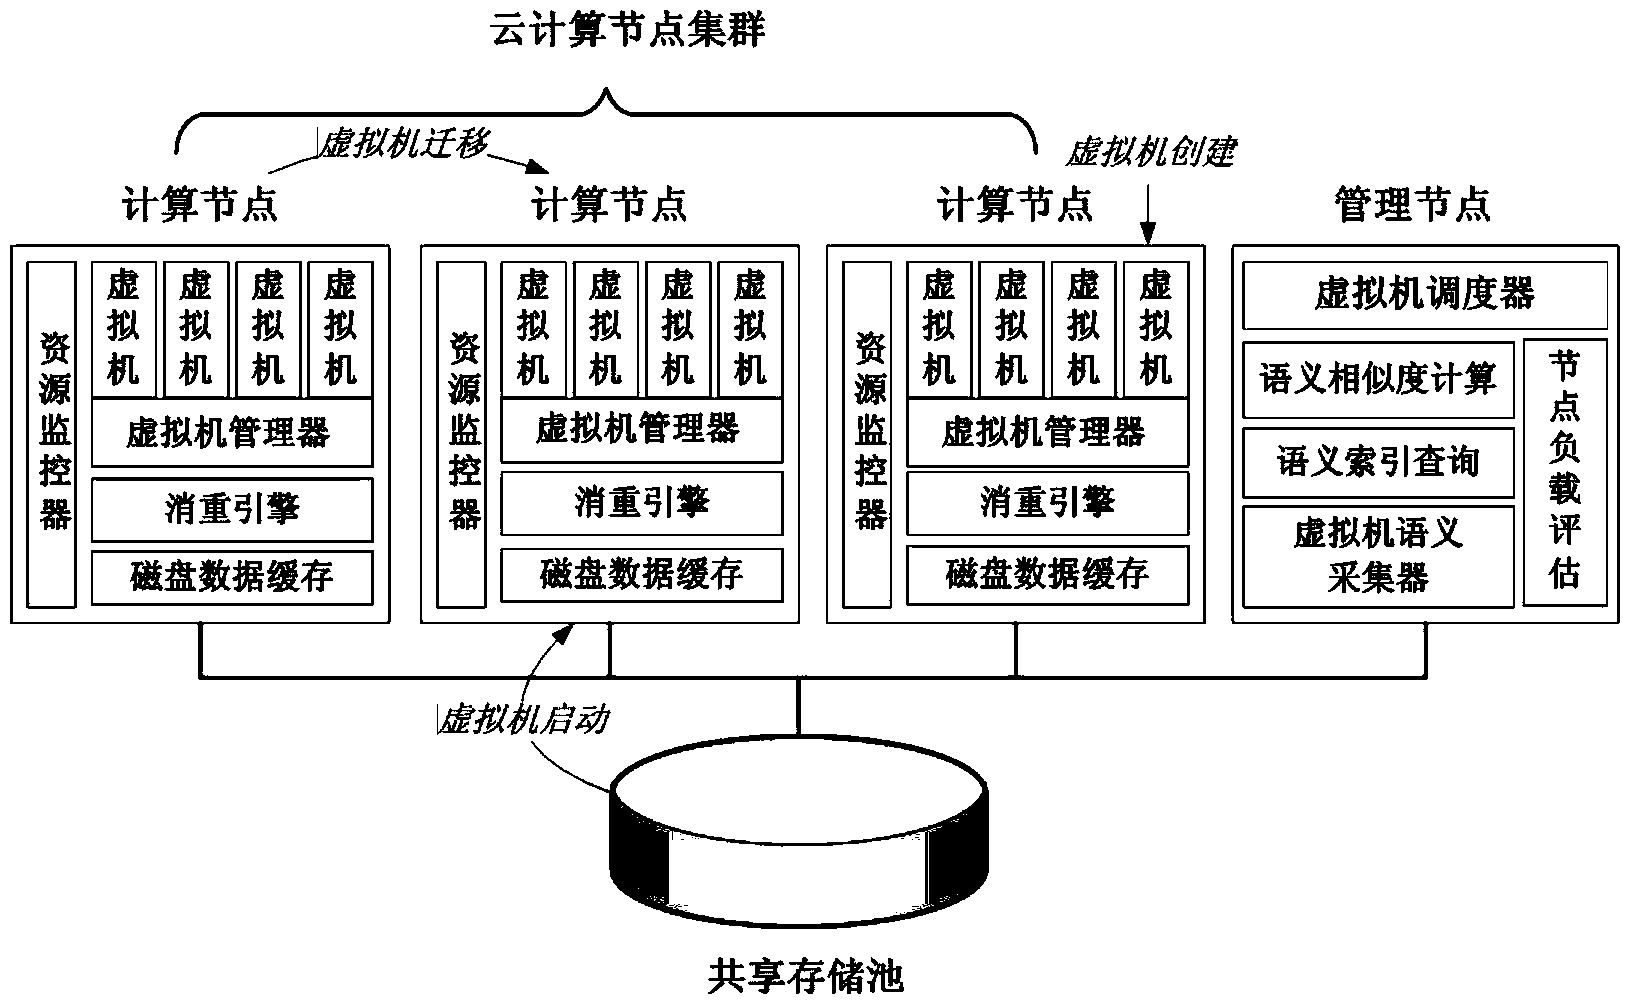 Cloud computing resource scheduling method based on repeat removing